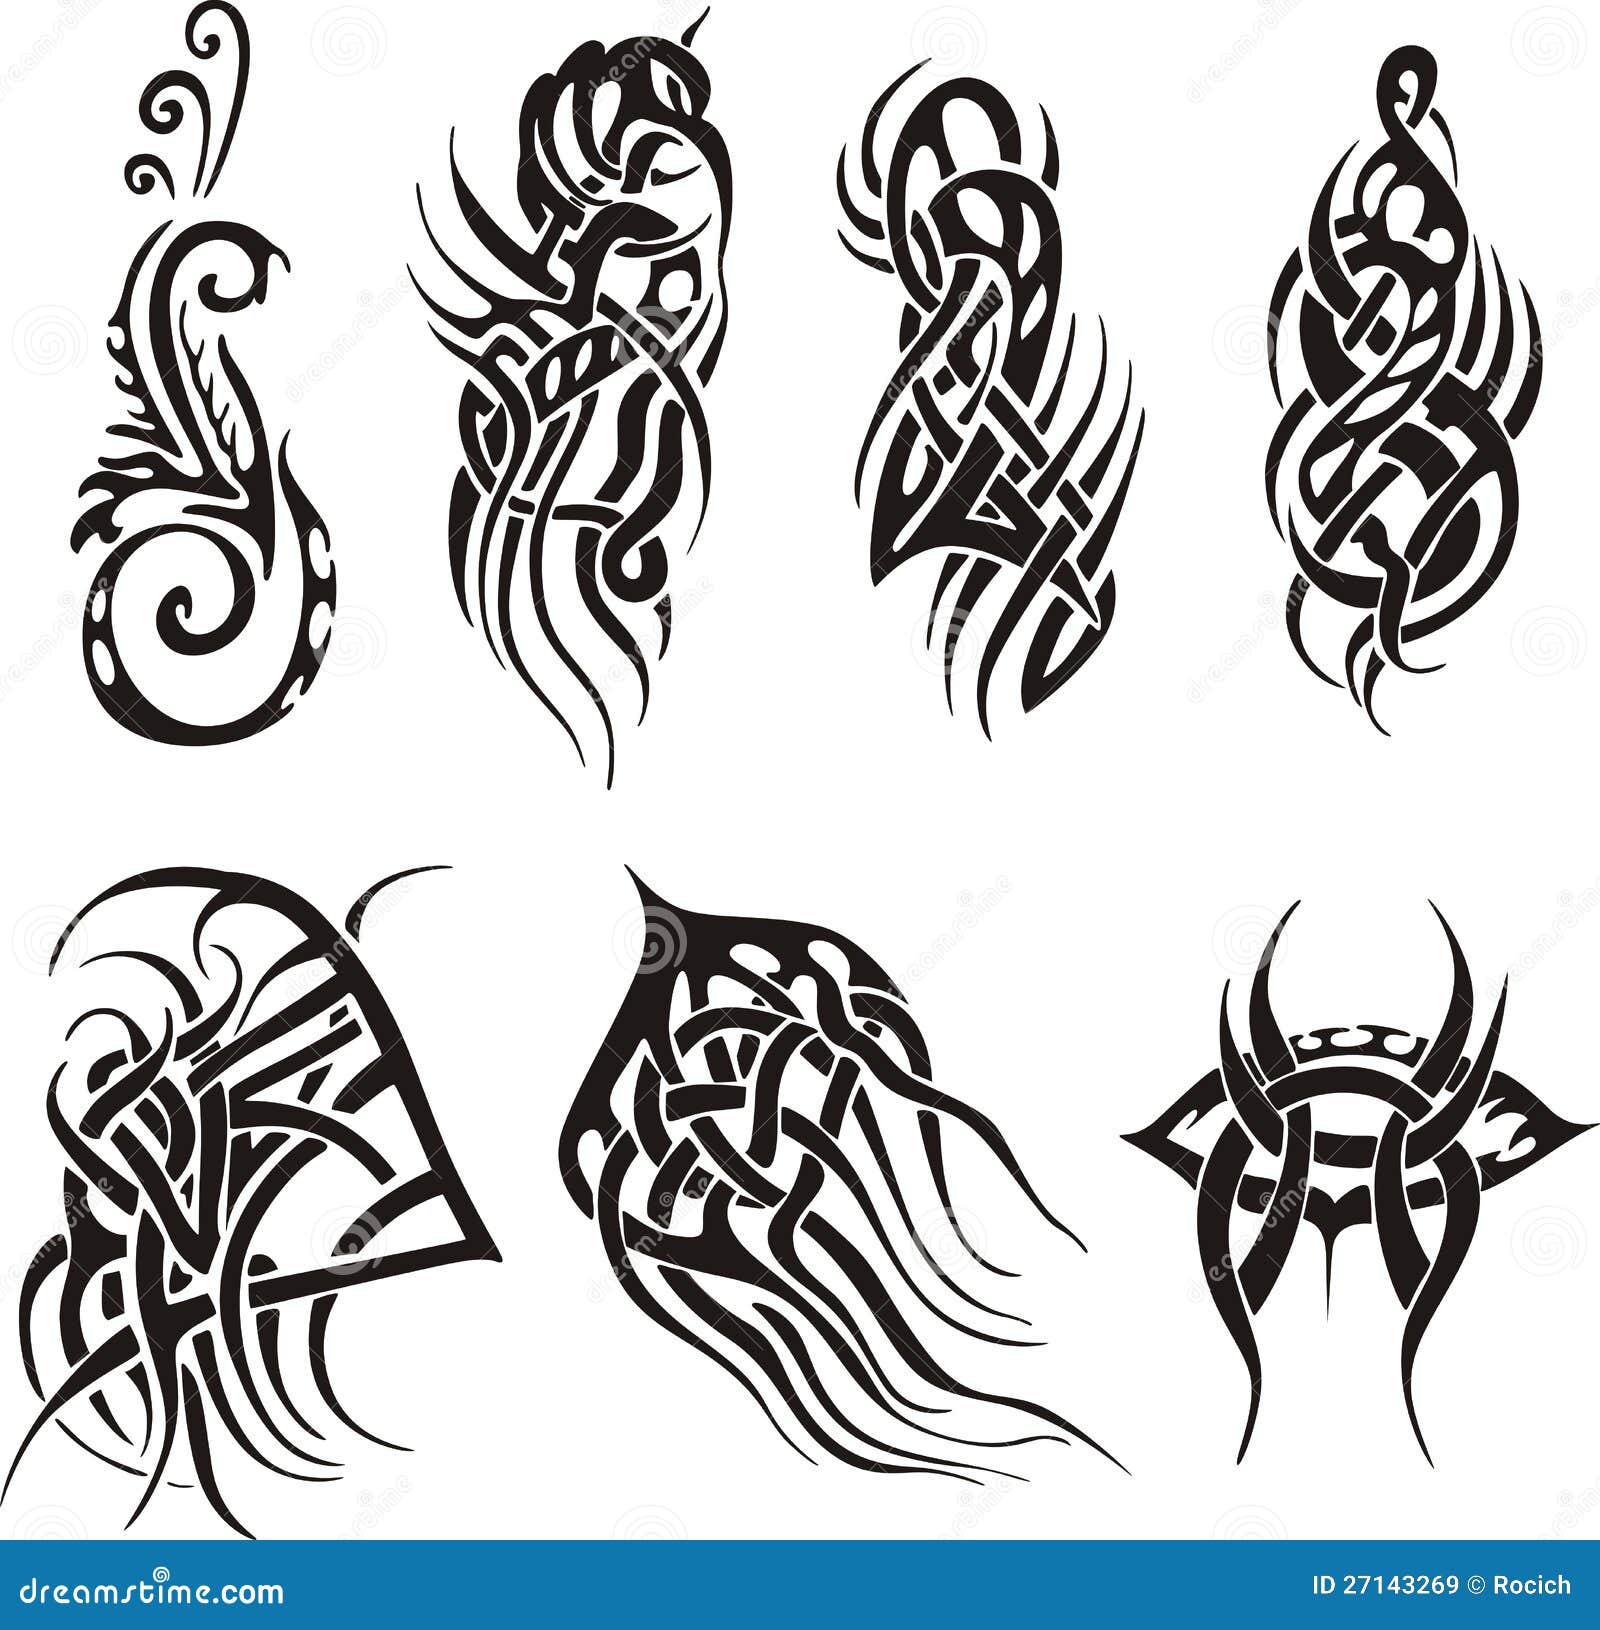 18989 Tribal Arm Tattoos Images Stock Photos  Vectors  Shutterstock